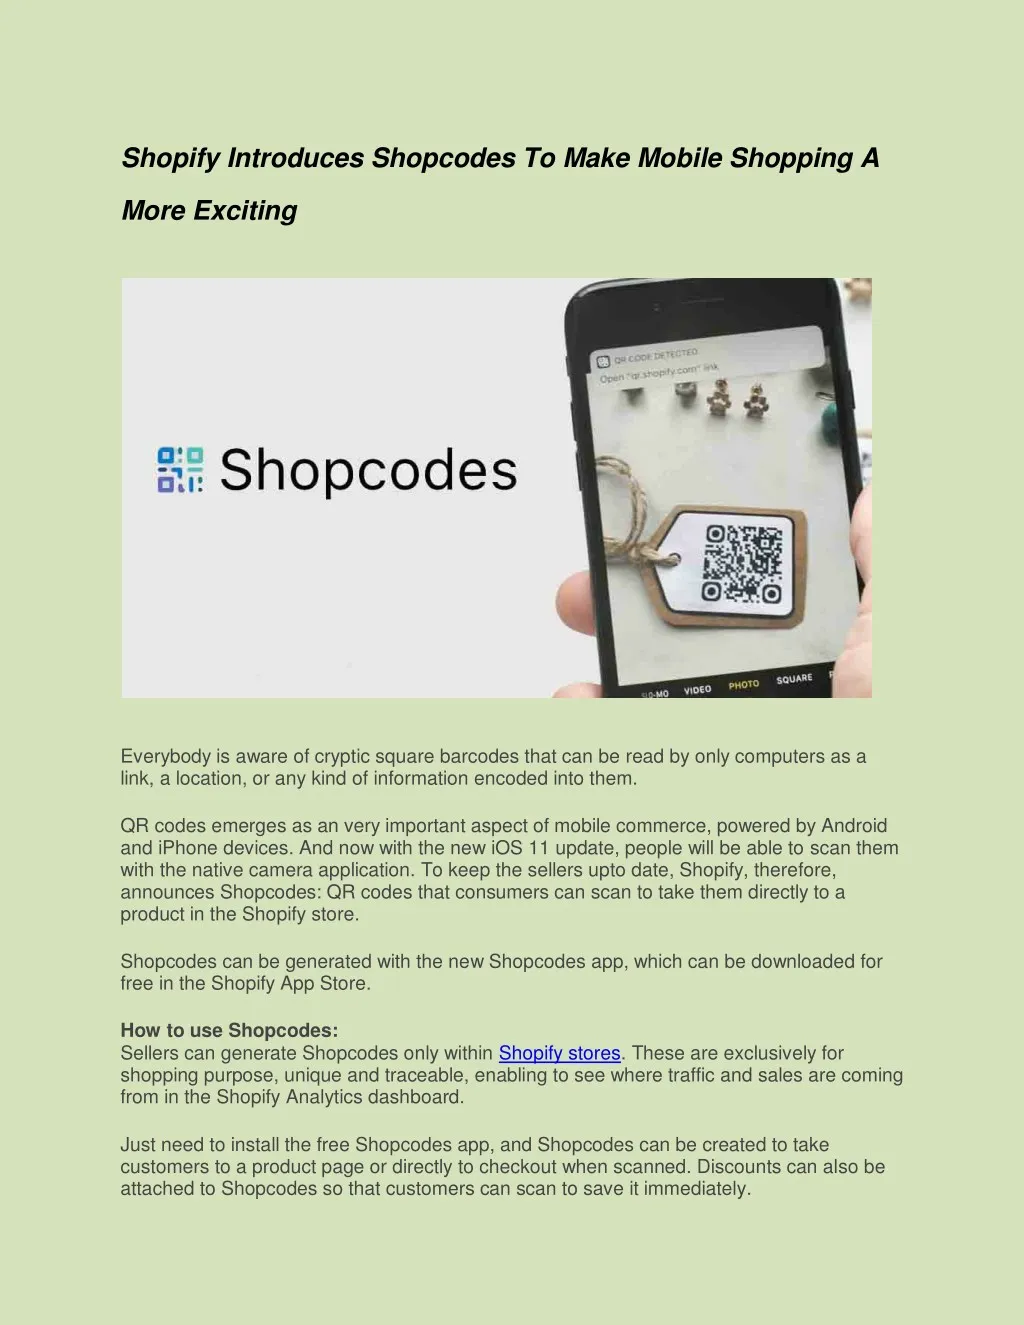 shopify introduces shopcodes to make mobile